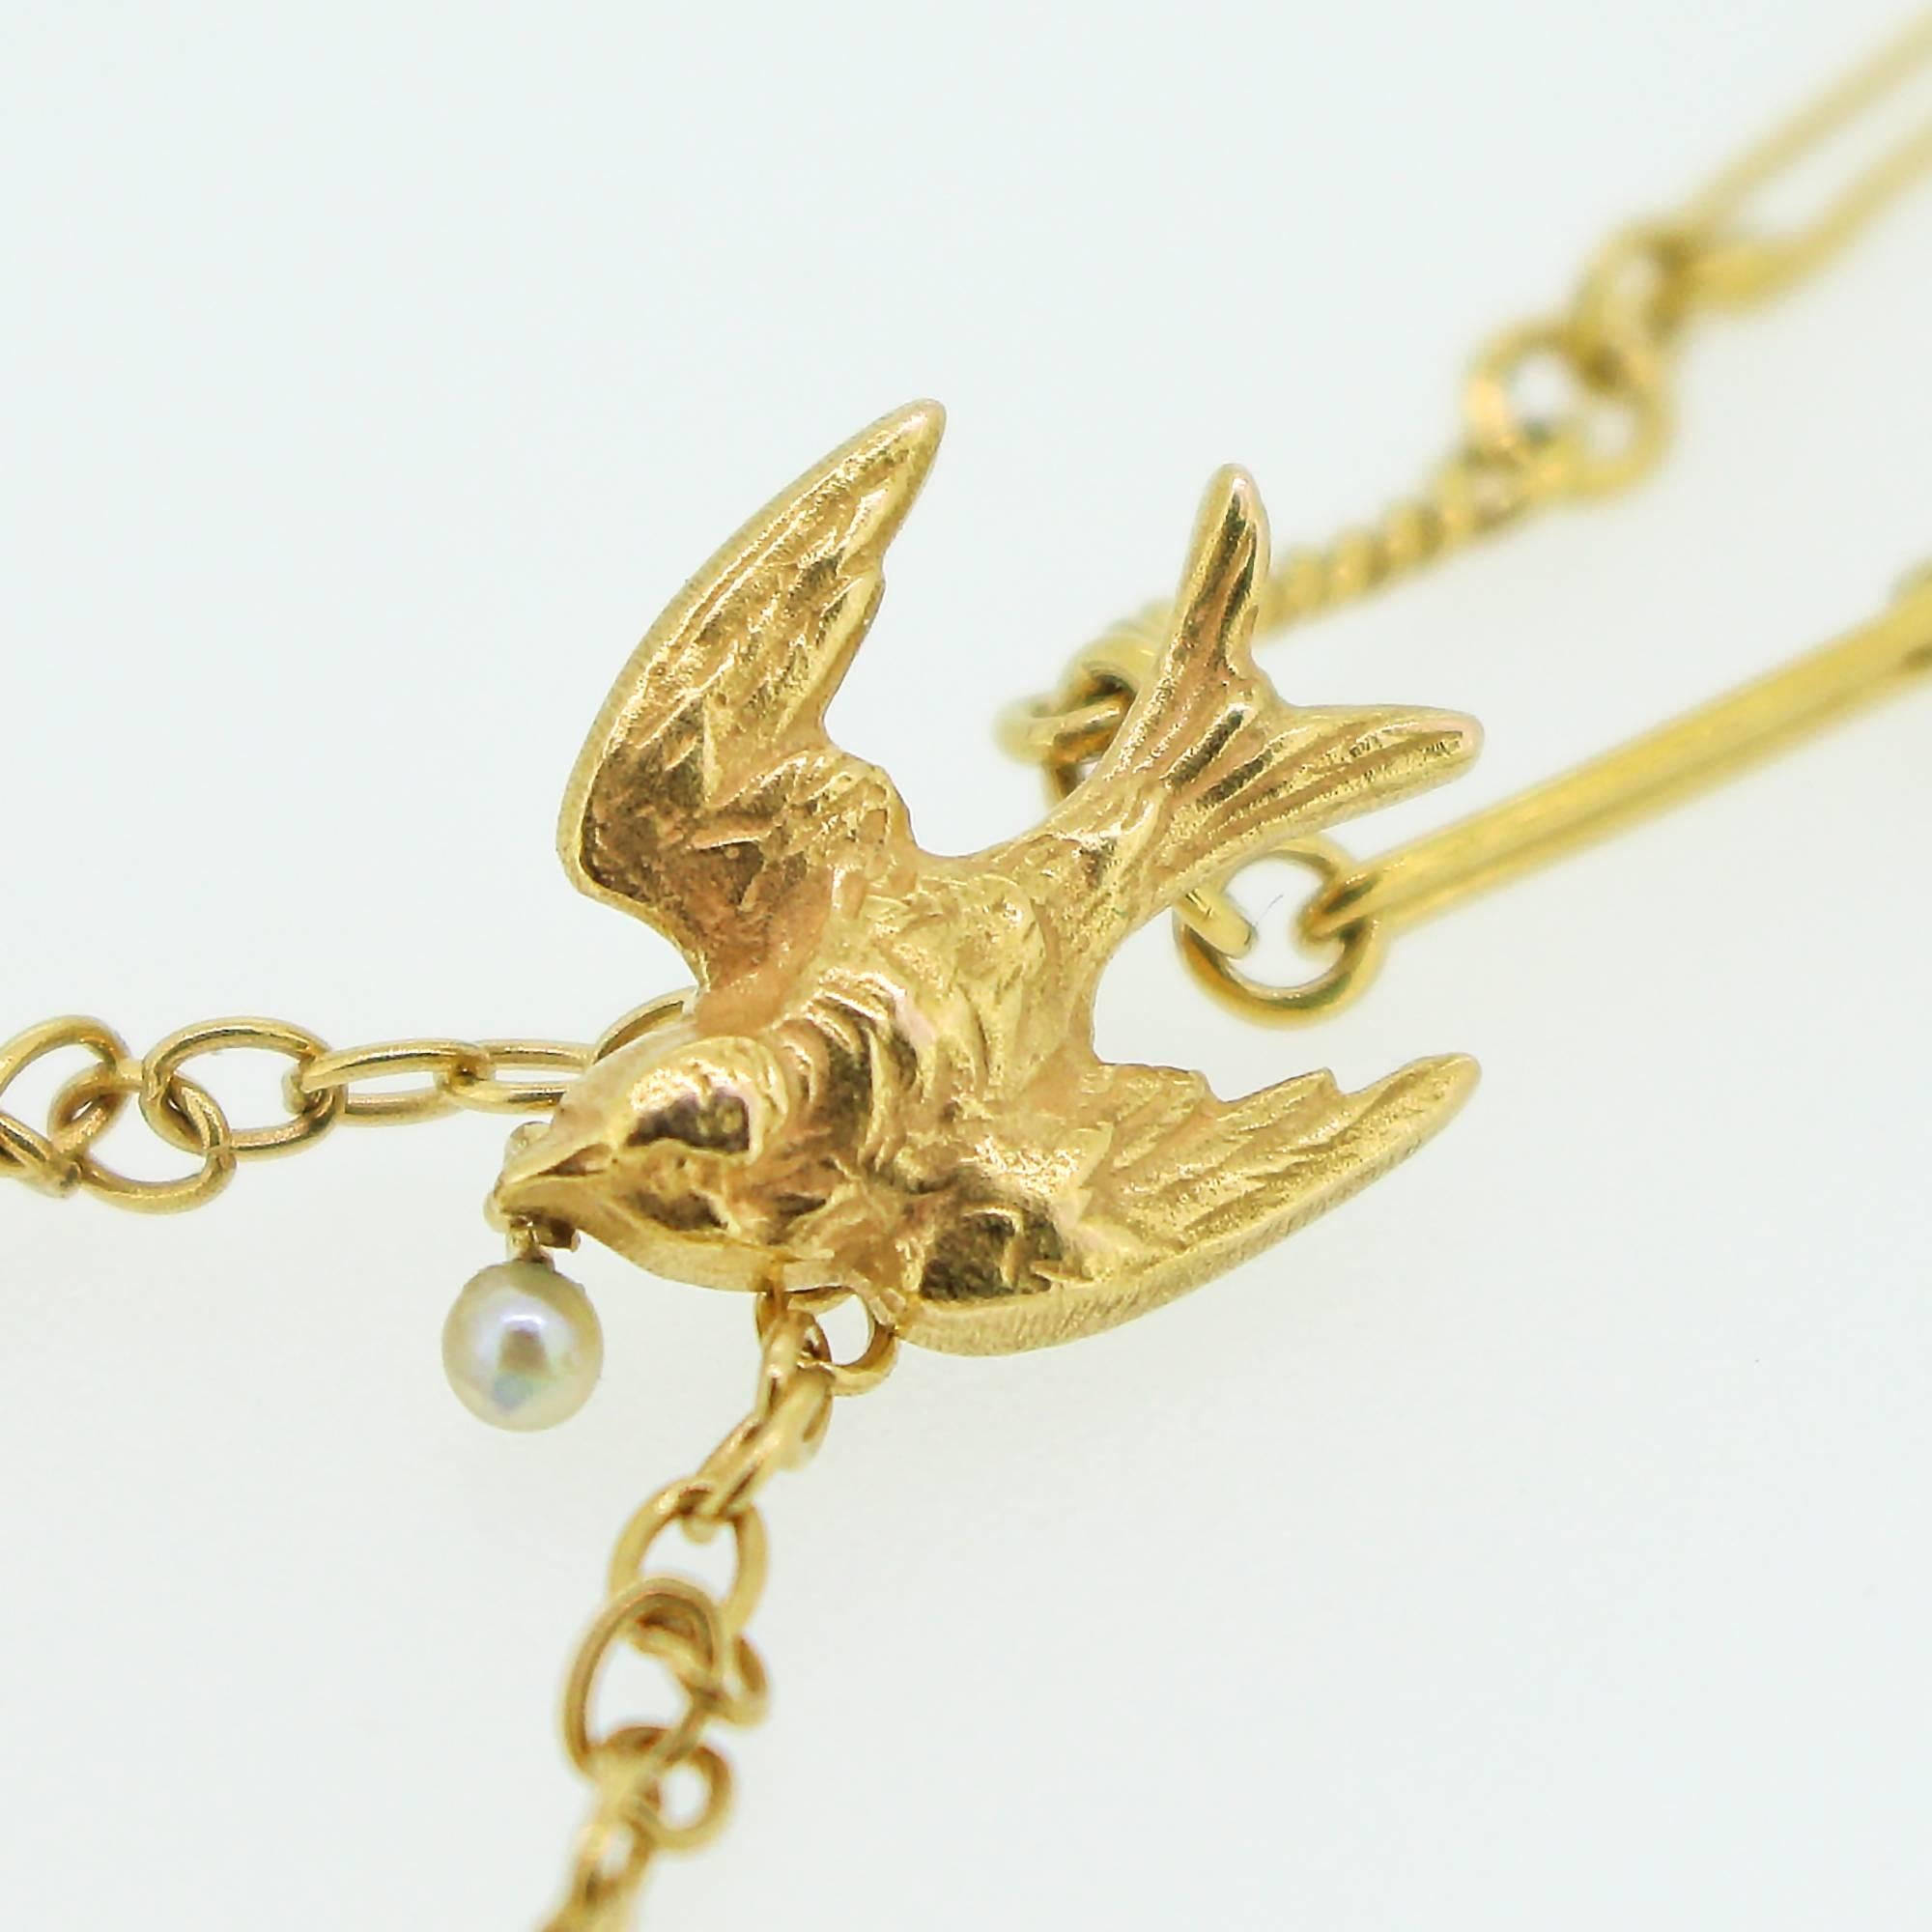 This 14k yellow gold necklace features 2 swallows at the base, joining together to hold a pear shape yellow diamond with a smaller swallow above holding a single, natural seed pearl. The birds are joined by a 14k yellow gold chain. The piece was